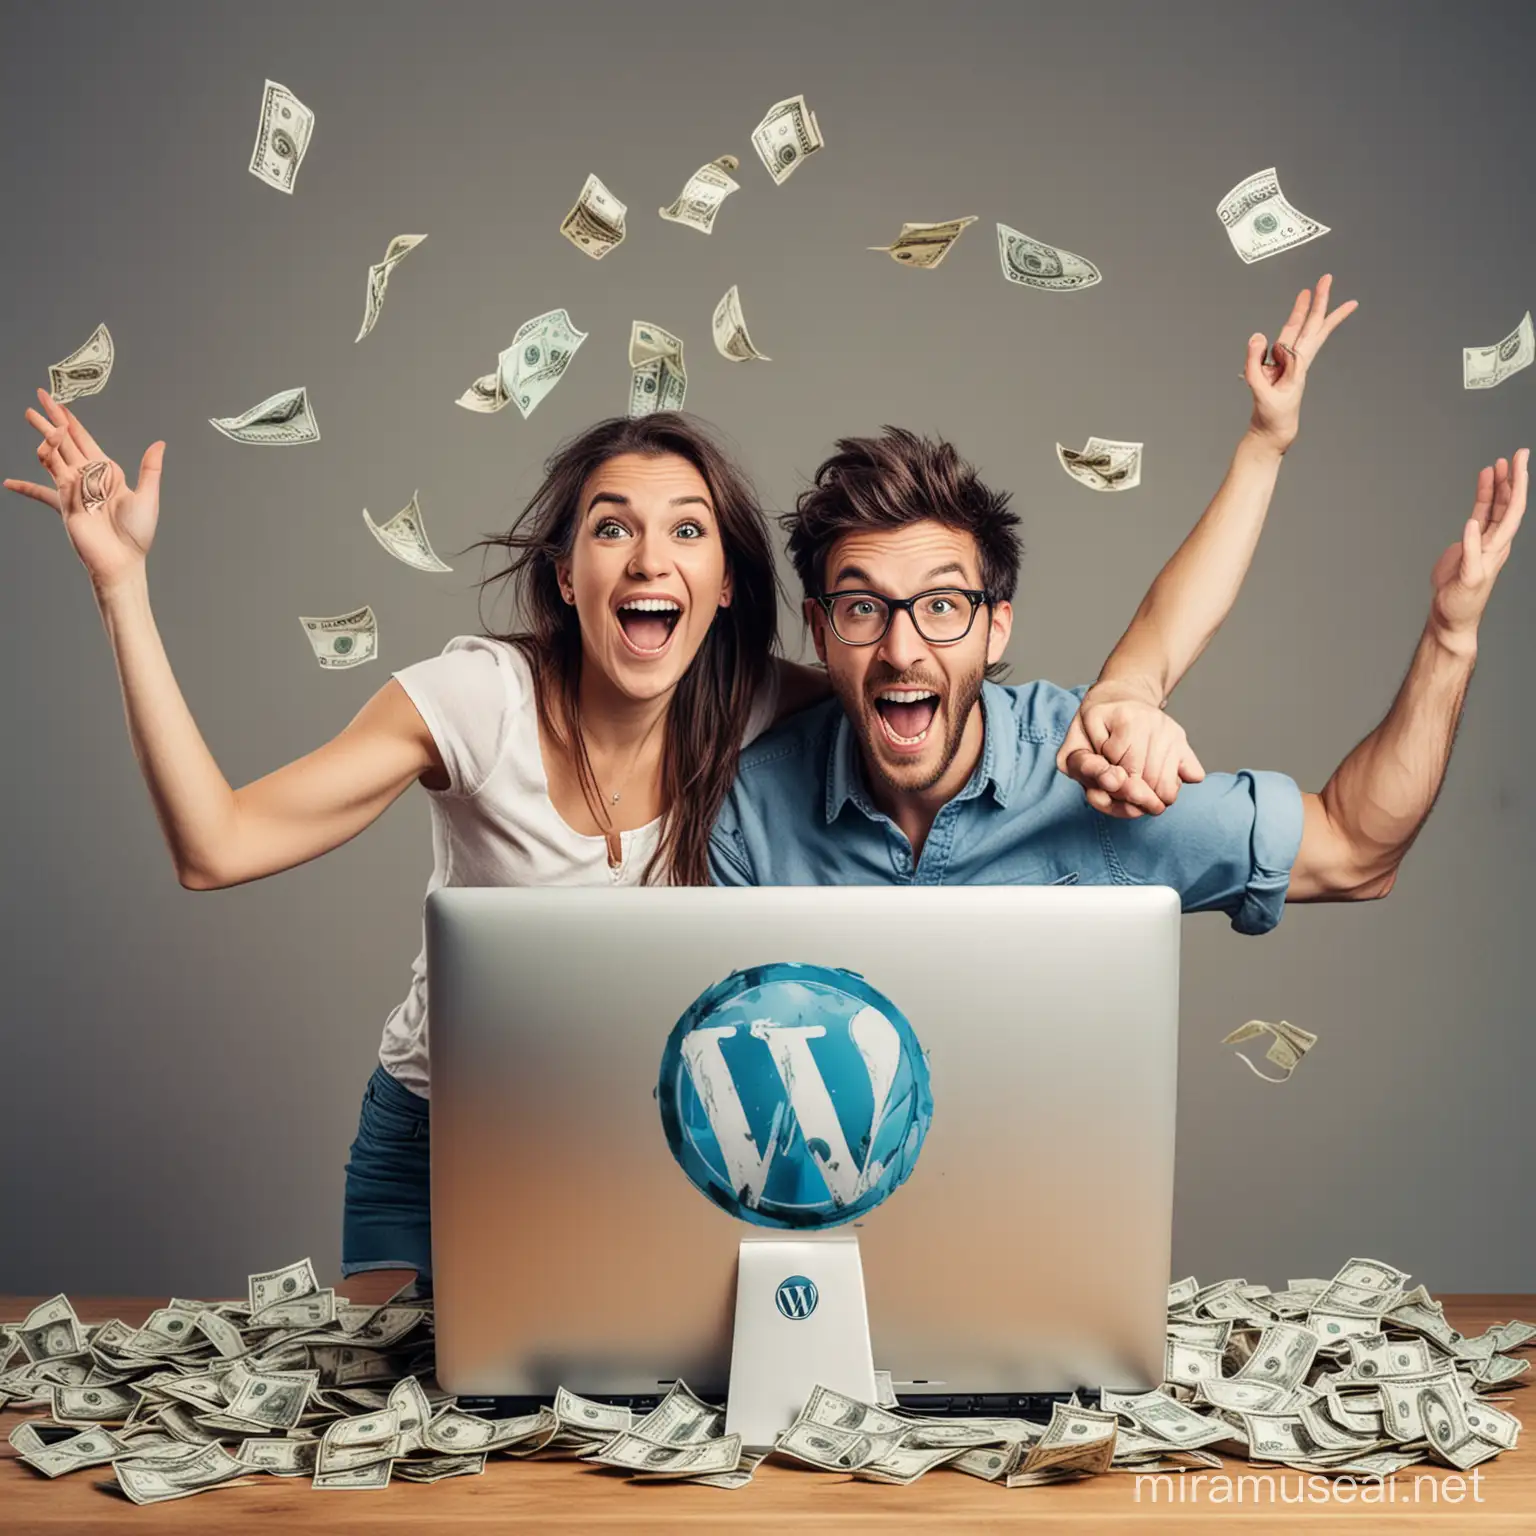 A very happy and excited man and woman with a WordPress logo and a big computer with a lot of money thrown at them.